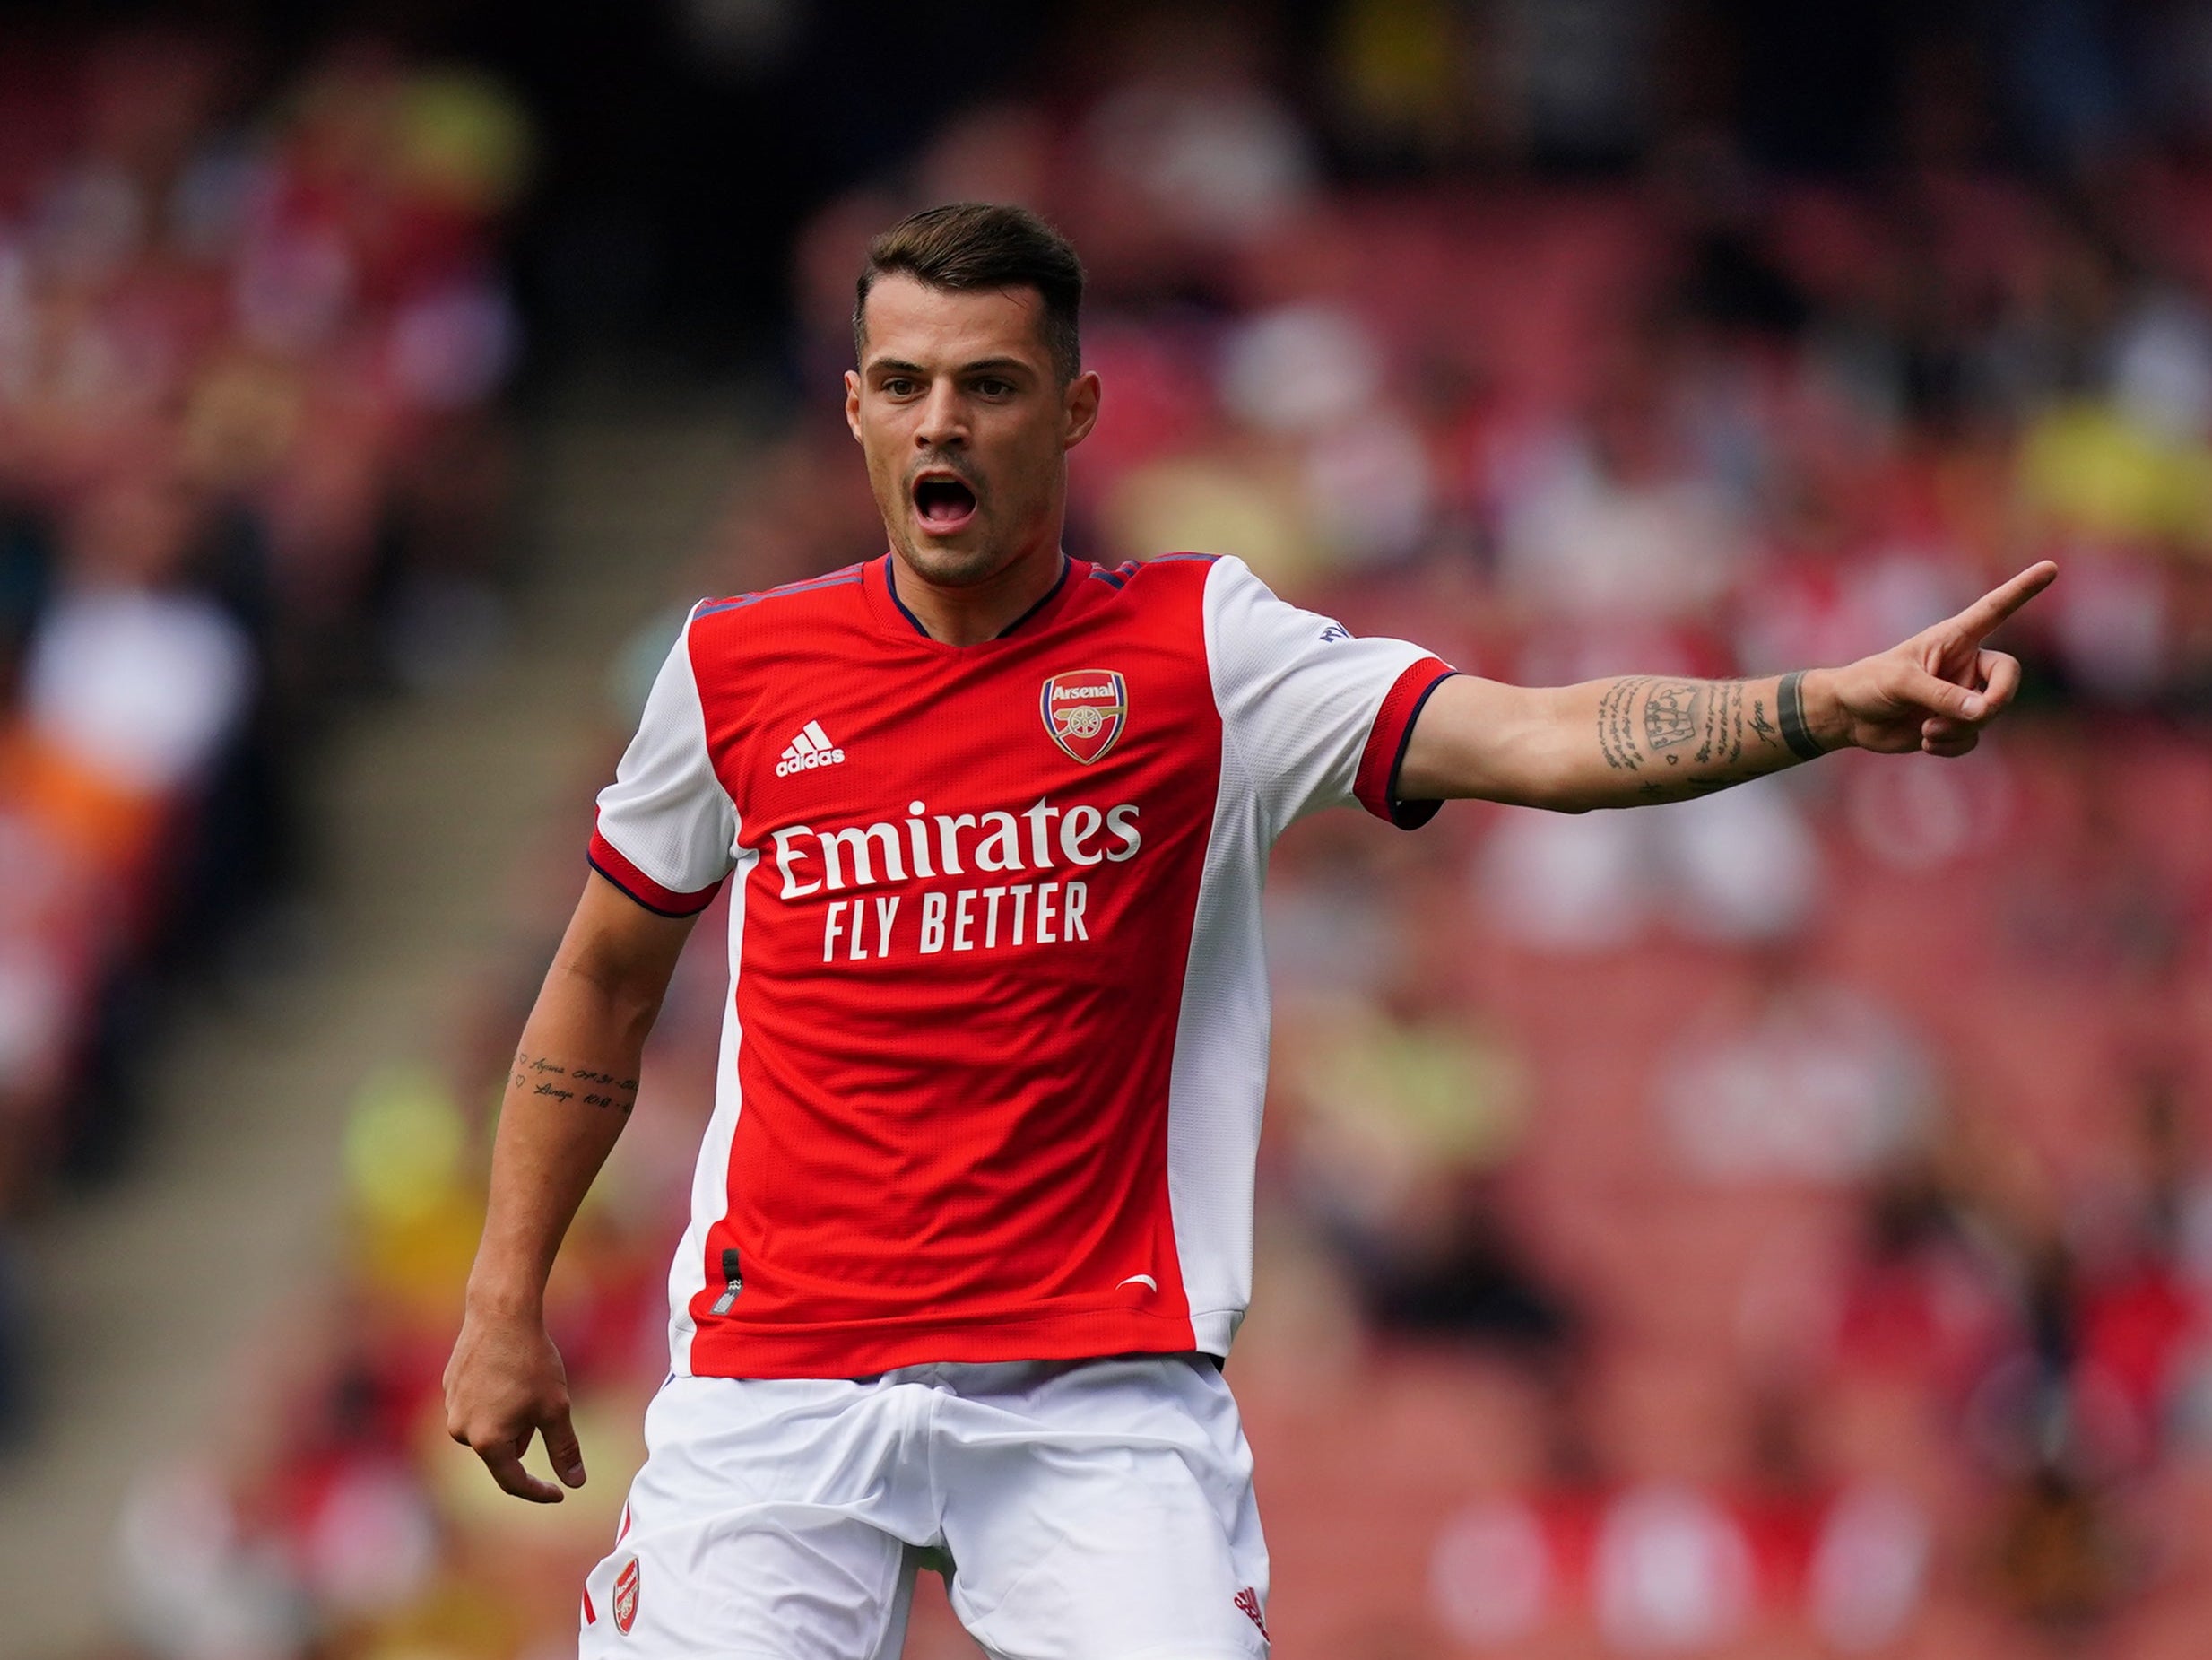 Arsenal midfielder Granit Xhaka has been ruled out for three months